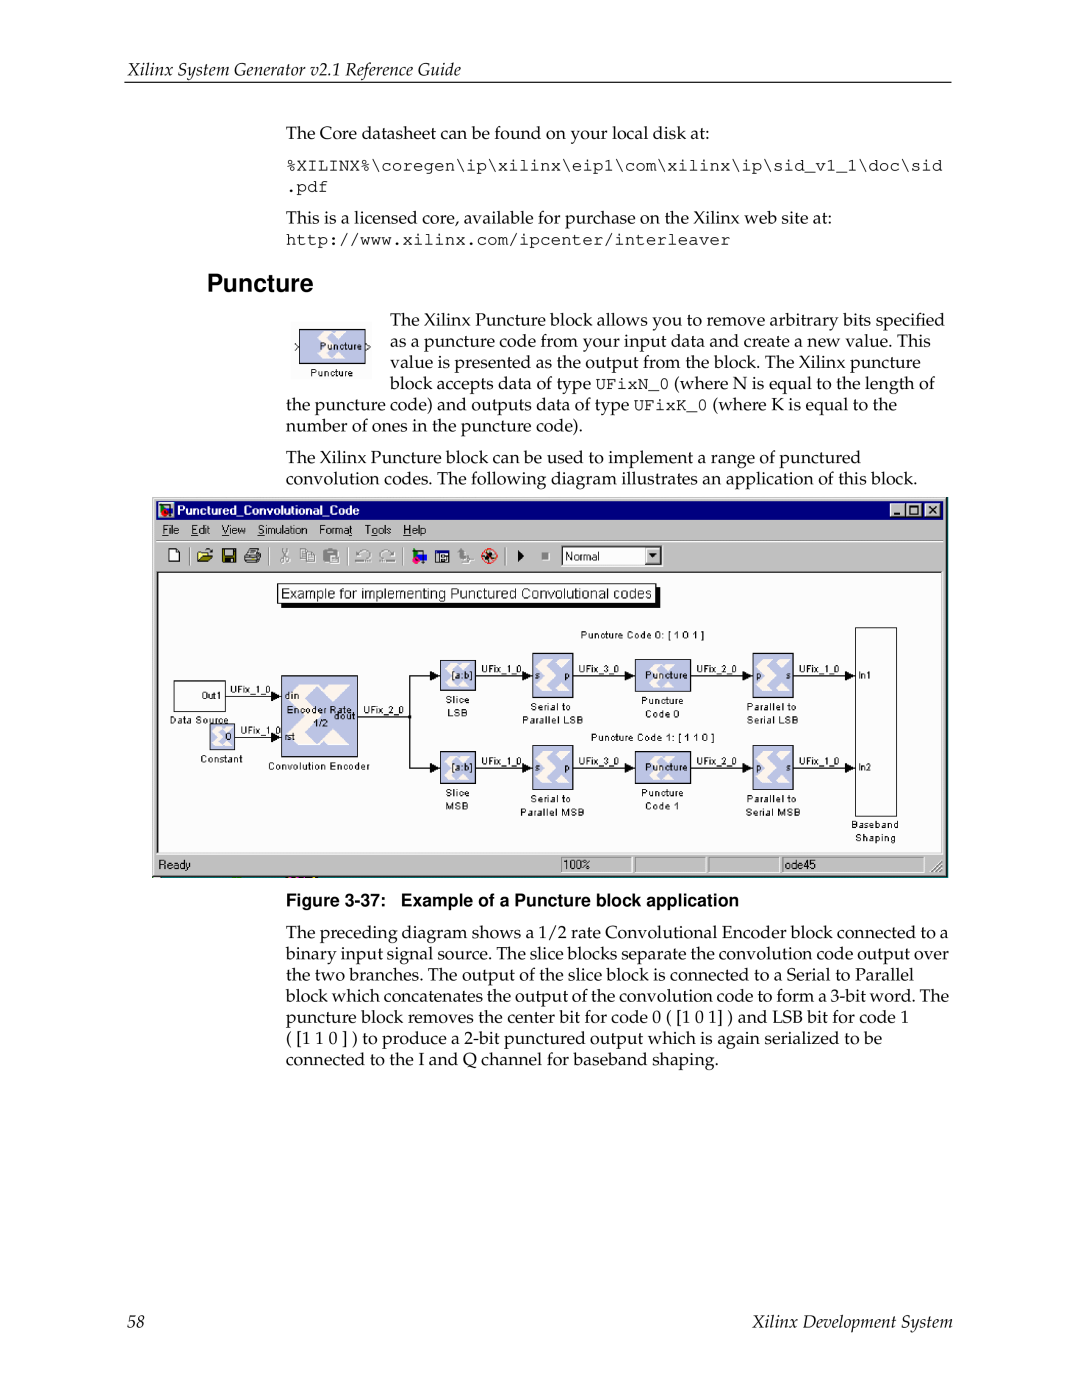 Xilinx V2.1 manual Puncture, Xilinx System Generator v2.1 Reference Guide, Xilinx Development System 